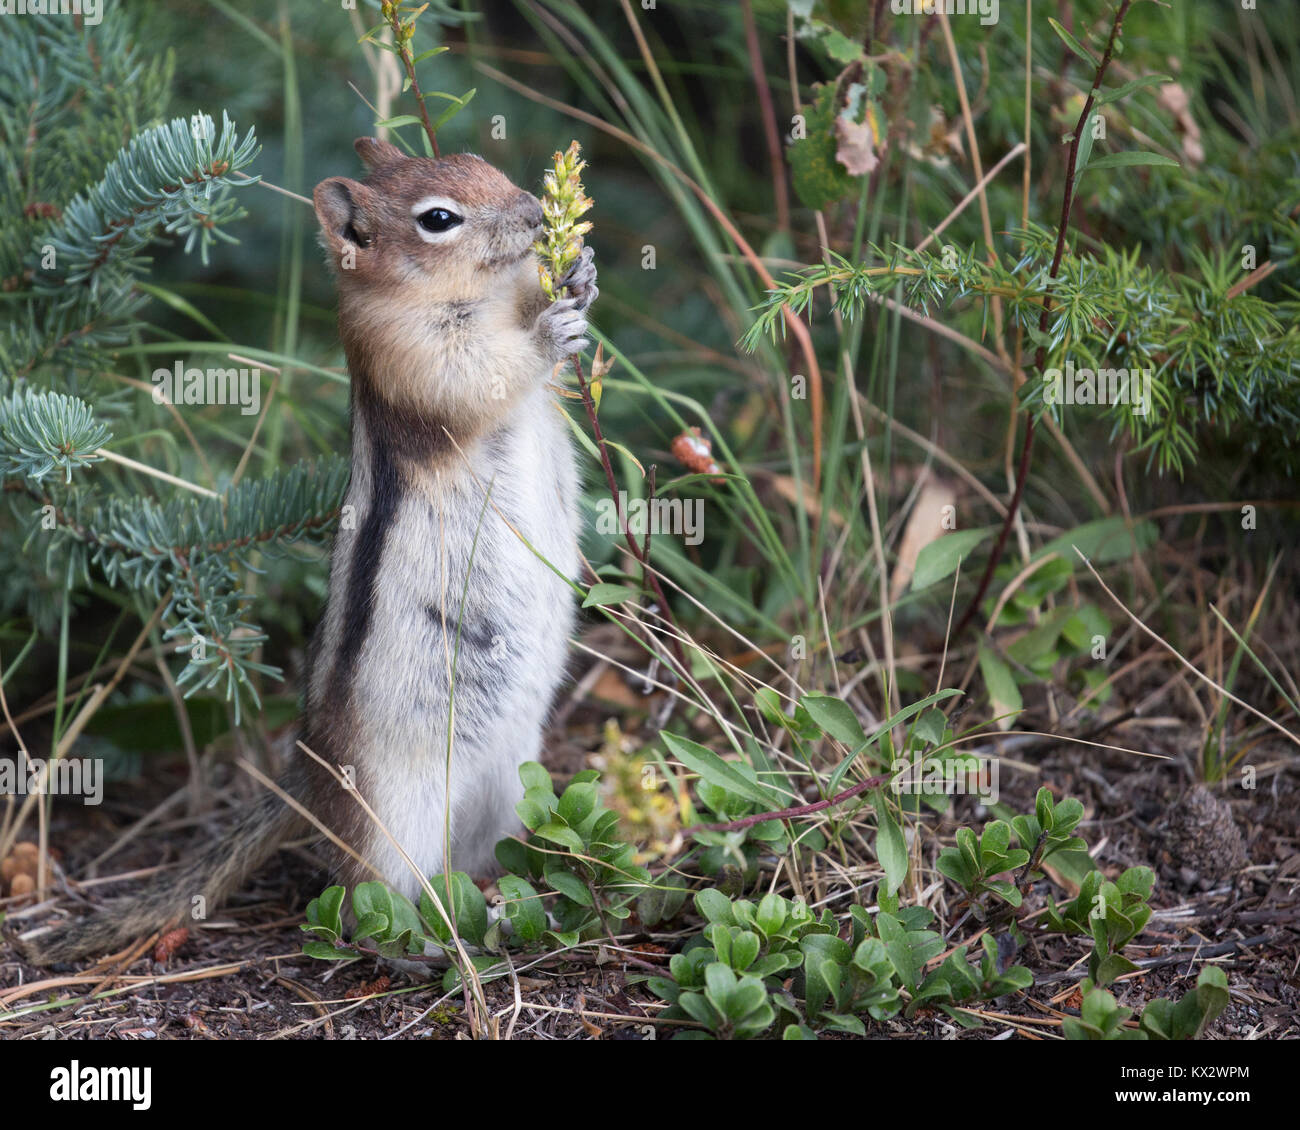 Golden-mantled ground squirrel standing feeding on a plant stalk in boreal forest, Banff National Park (Callospermophilus lateralis) Stock Photo